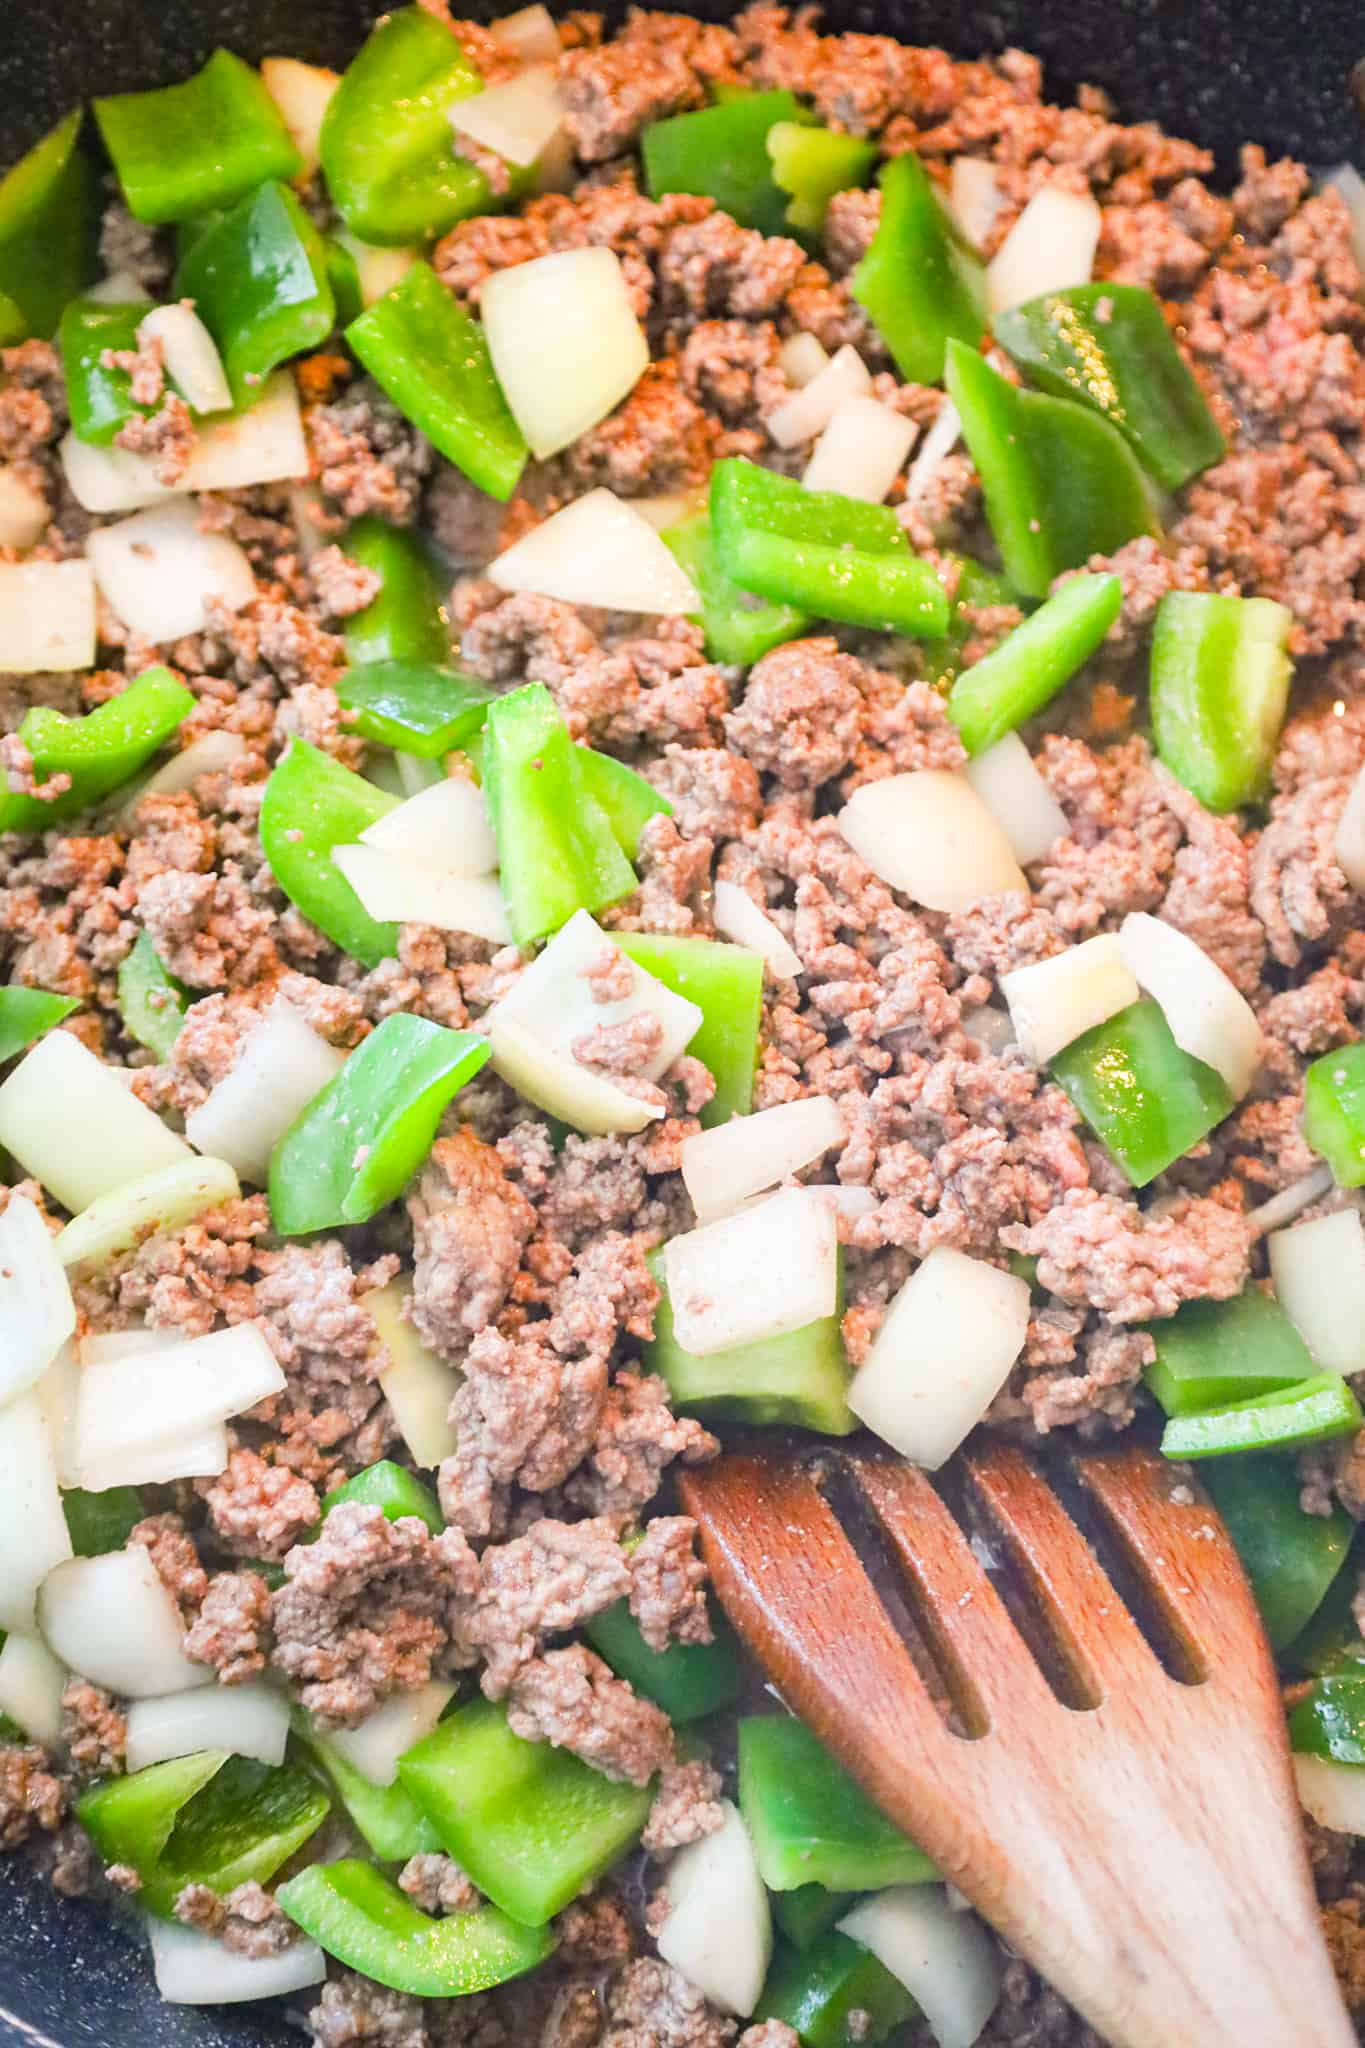 diced green peppers, diced onions and ground beef cooking in a saute pan